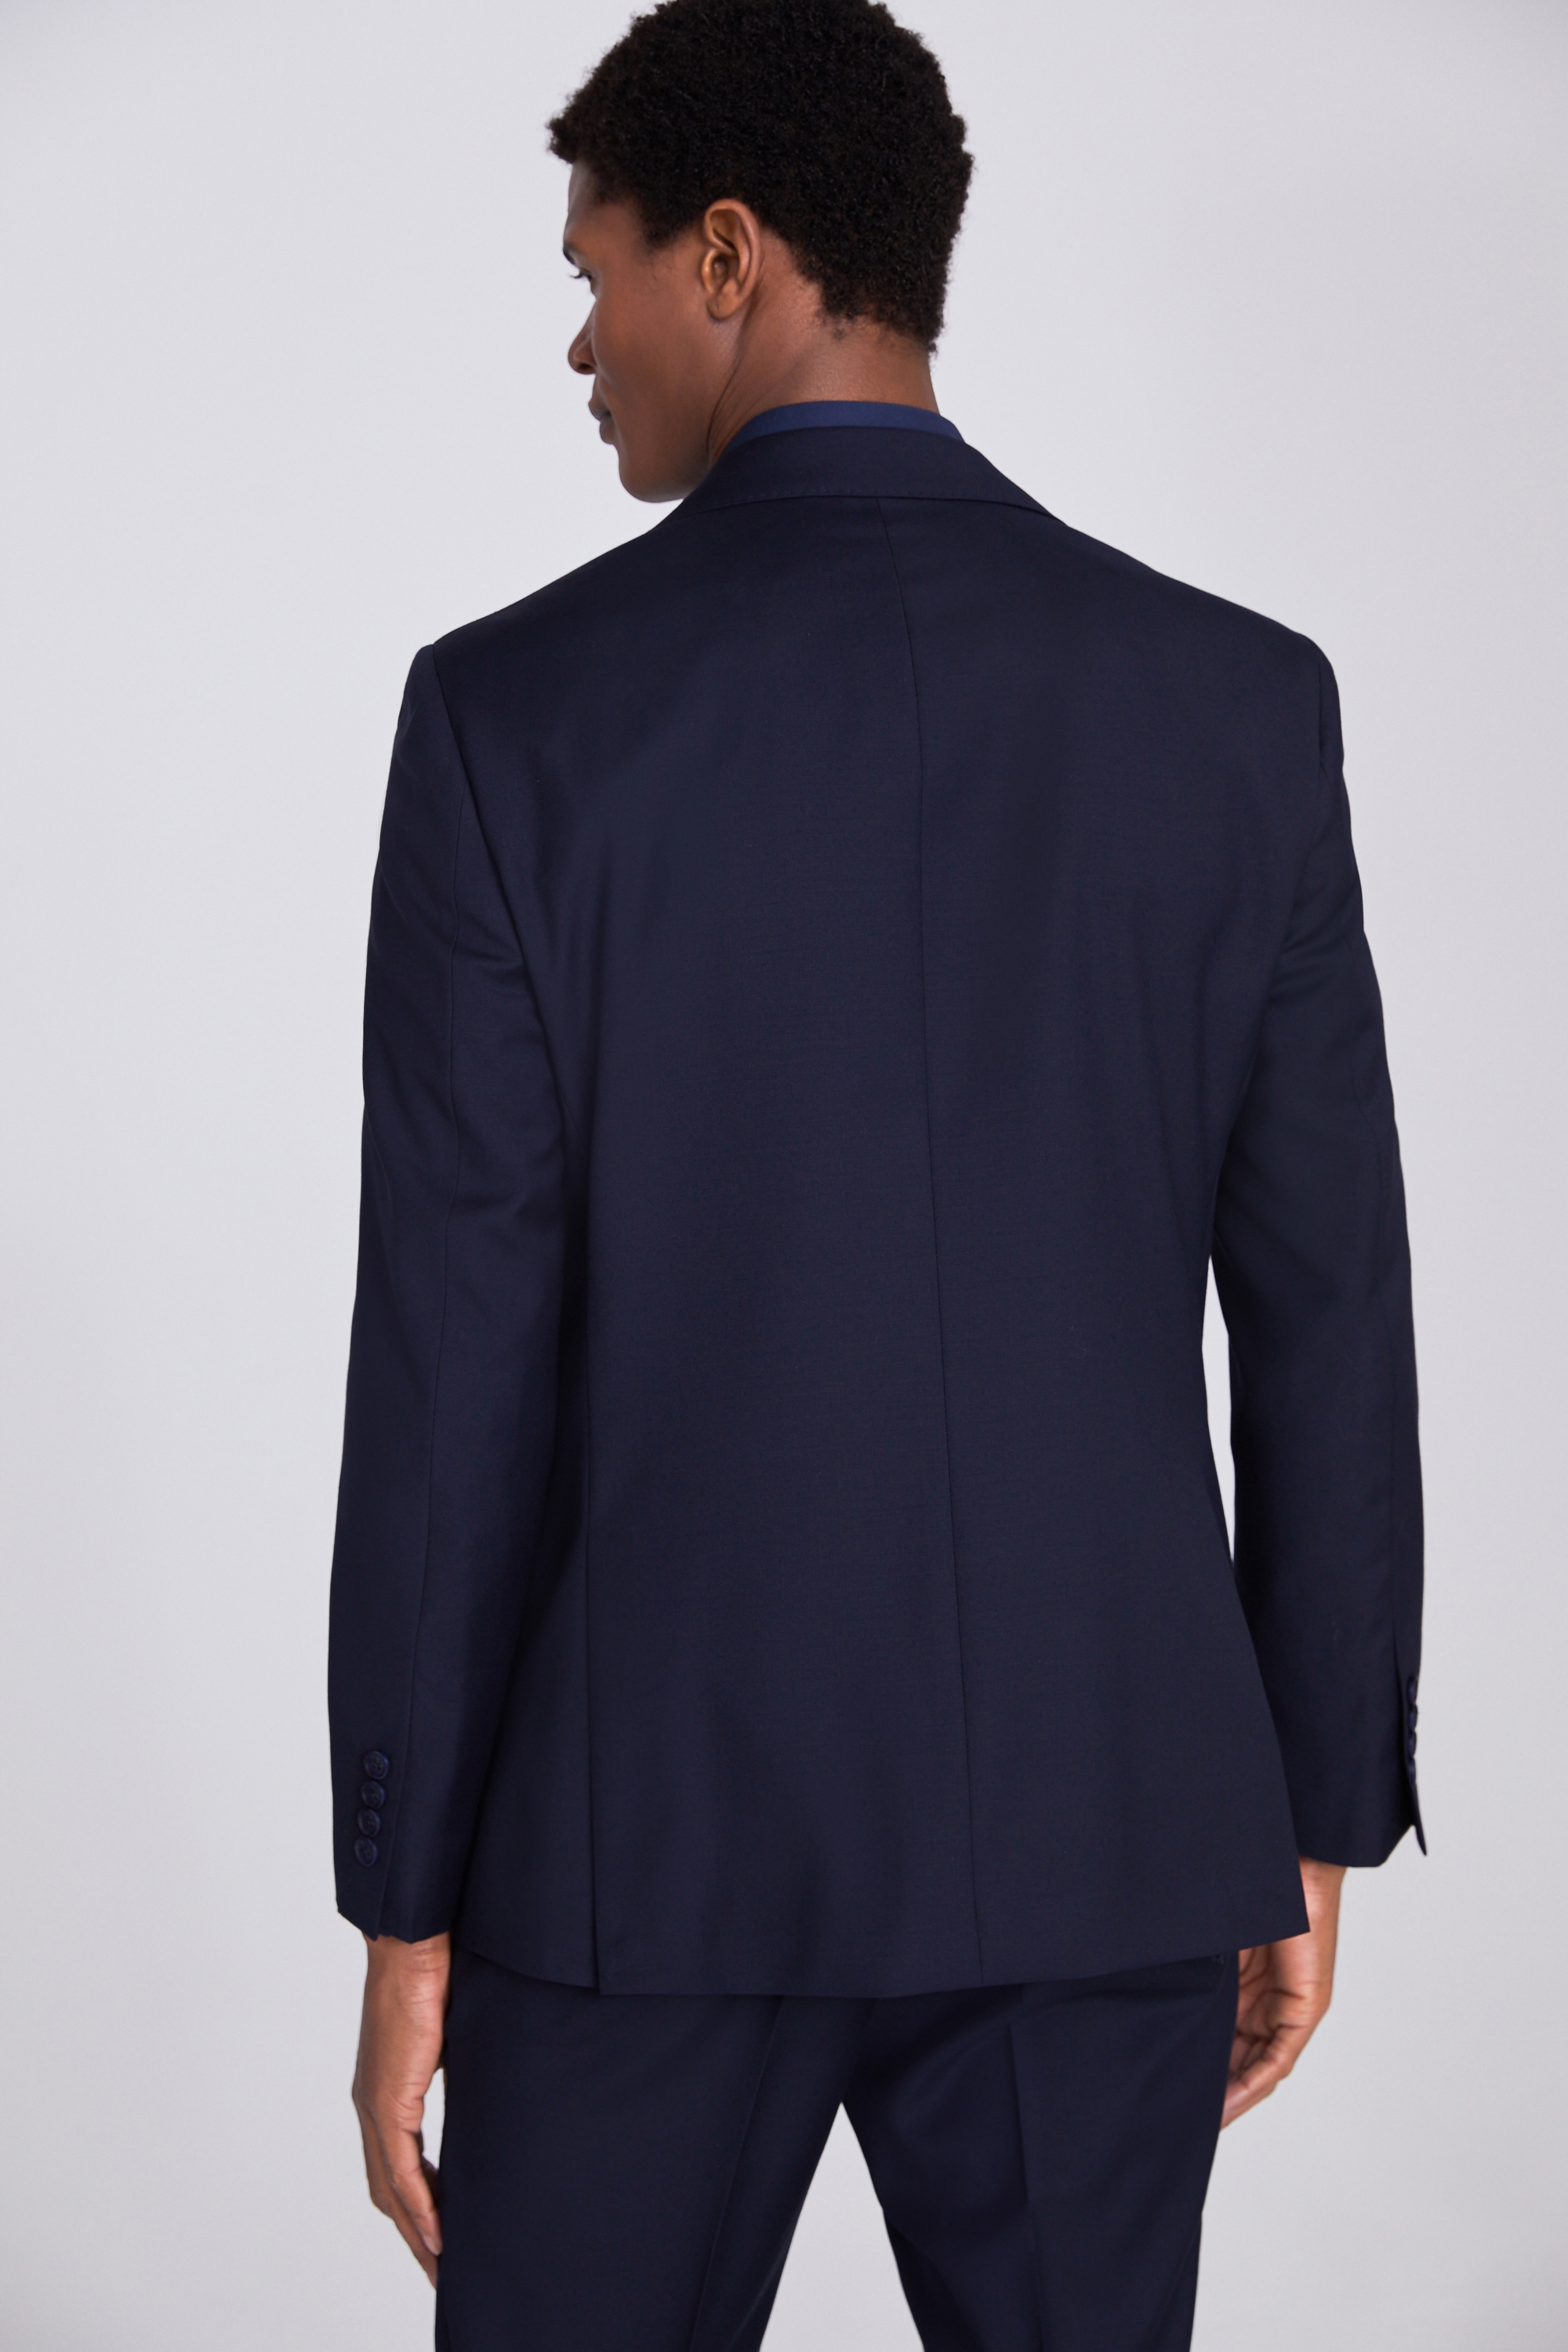 Tailored Fit Navy Jacket | Buy Online at Moss